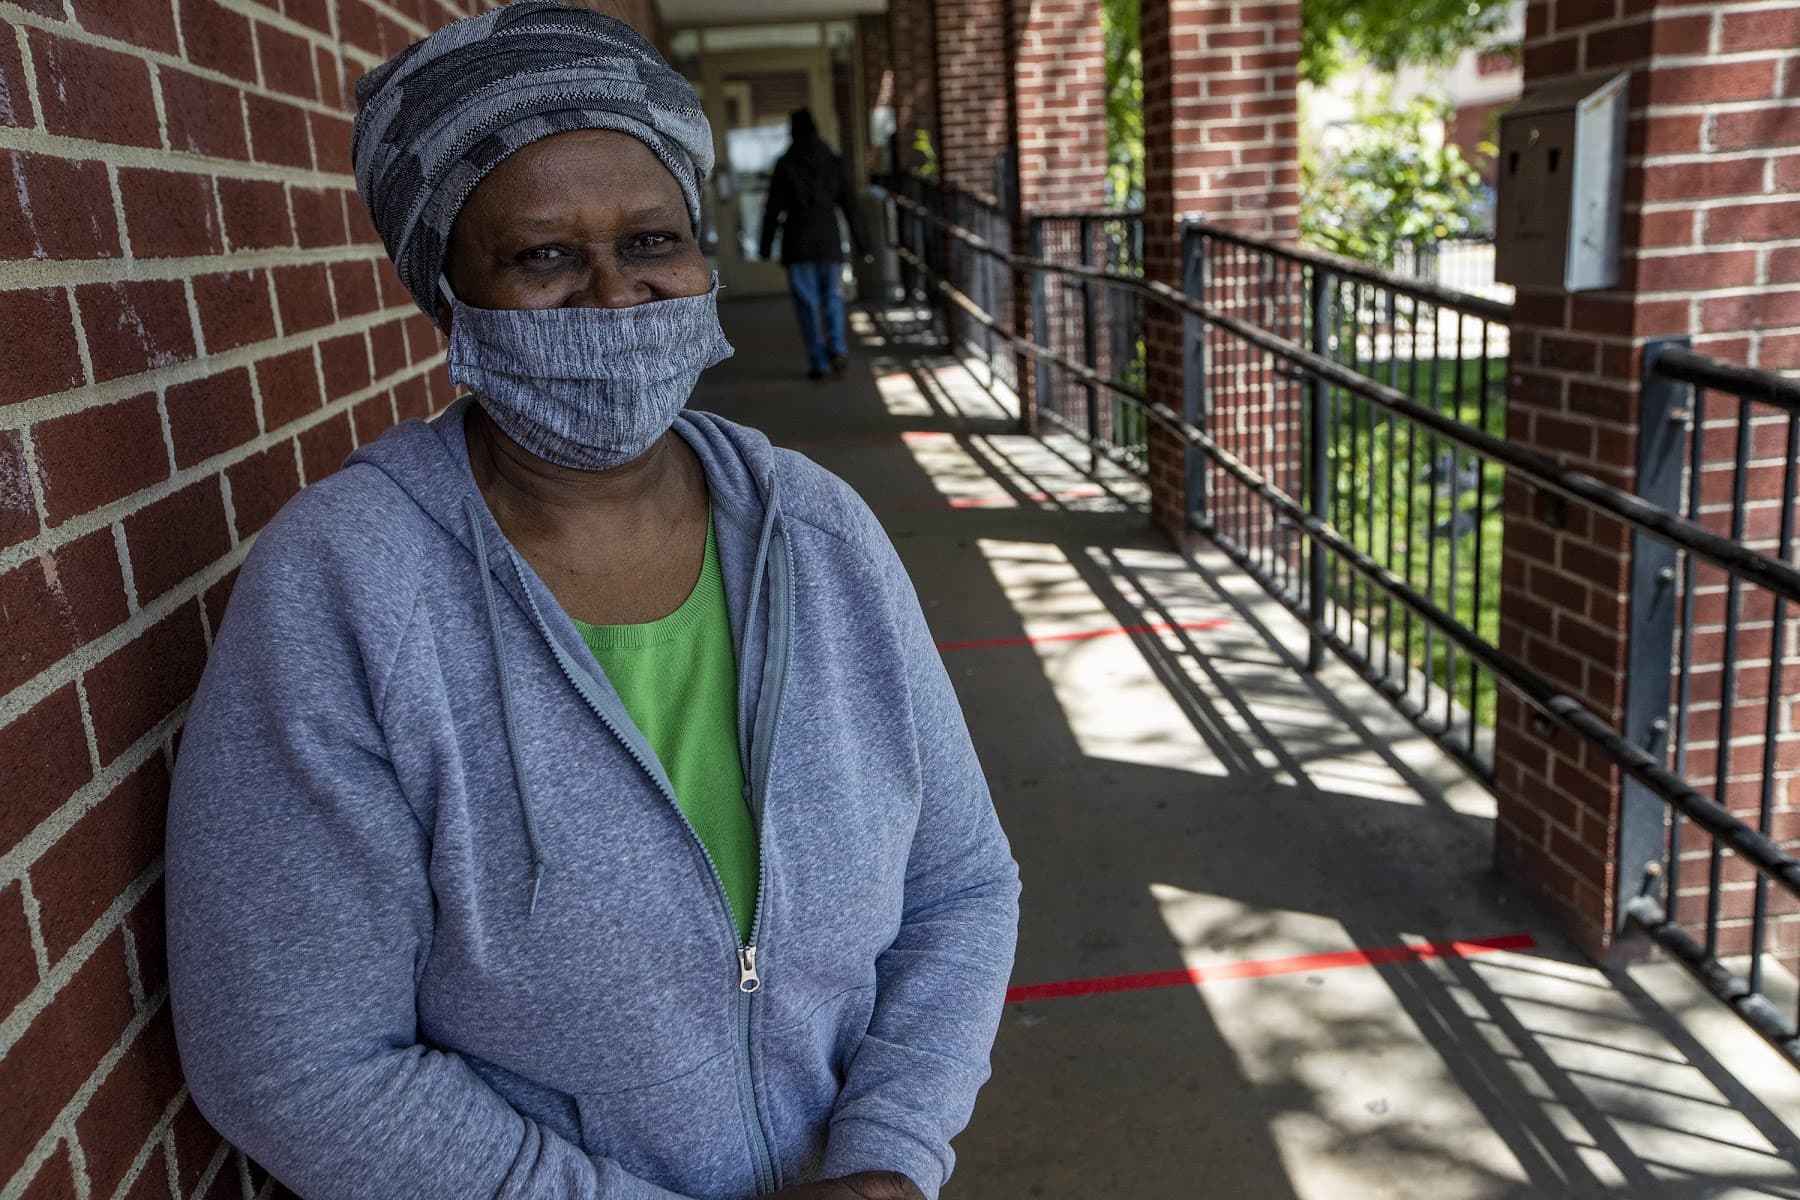 Lucy and other women who are housed and coming to the Rosie's Place food pantry tent can't go inside the facility for meals and services during the pandemic.